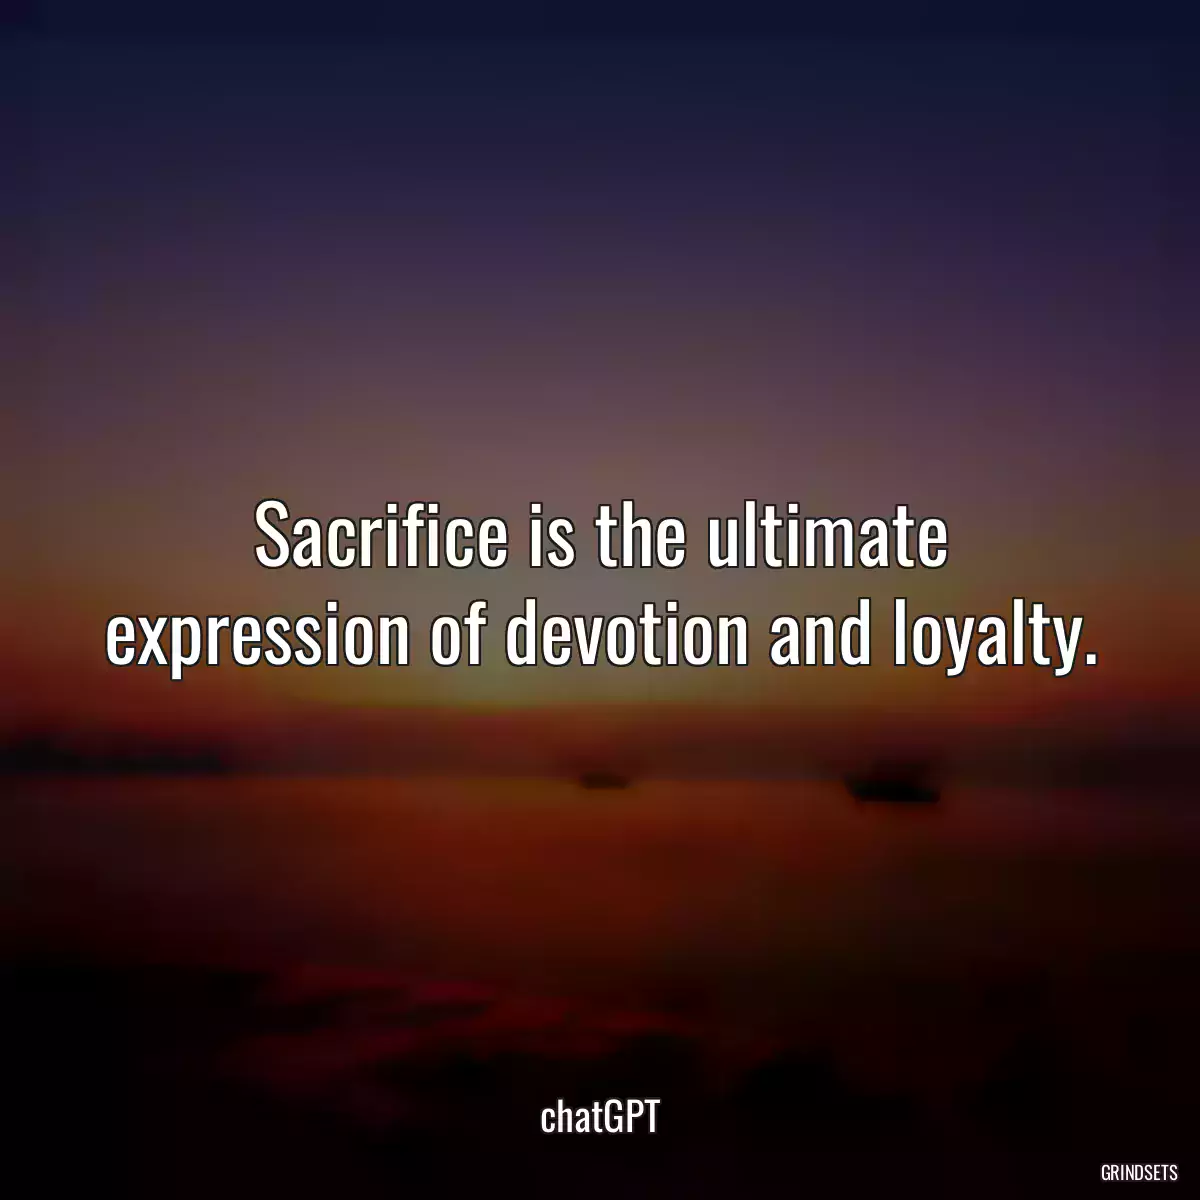 Sacrifice is the ultimate expression of devotion and loyalty.